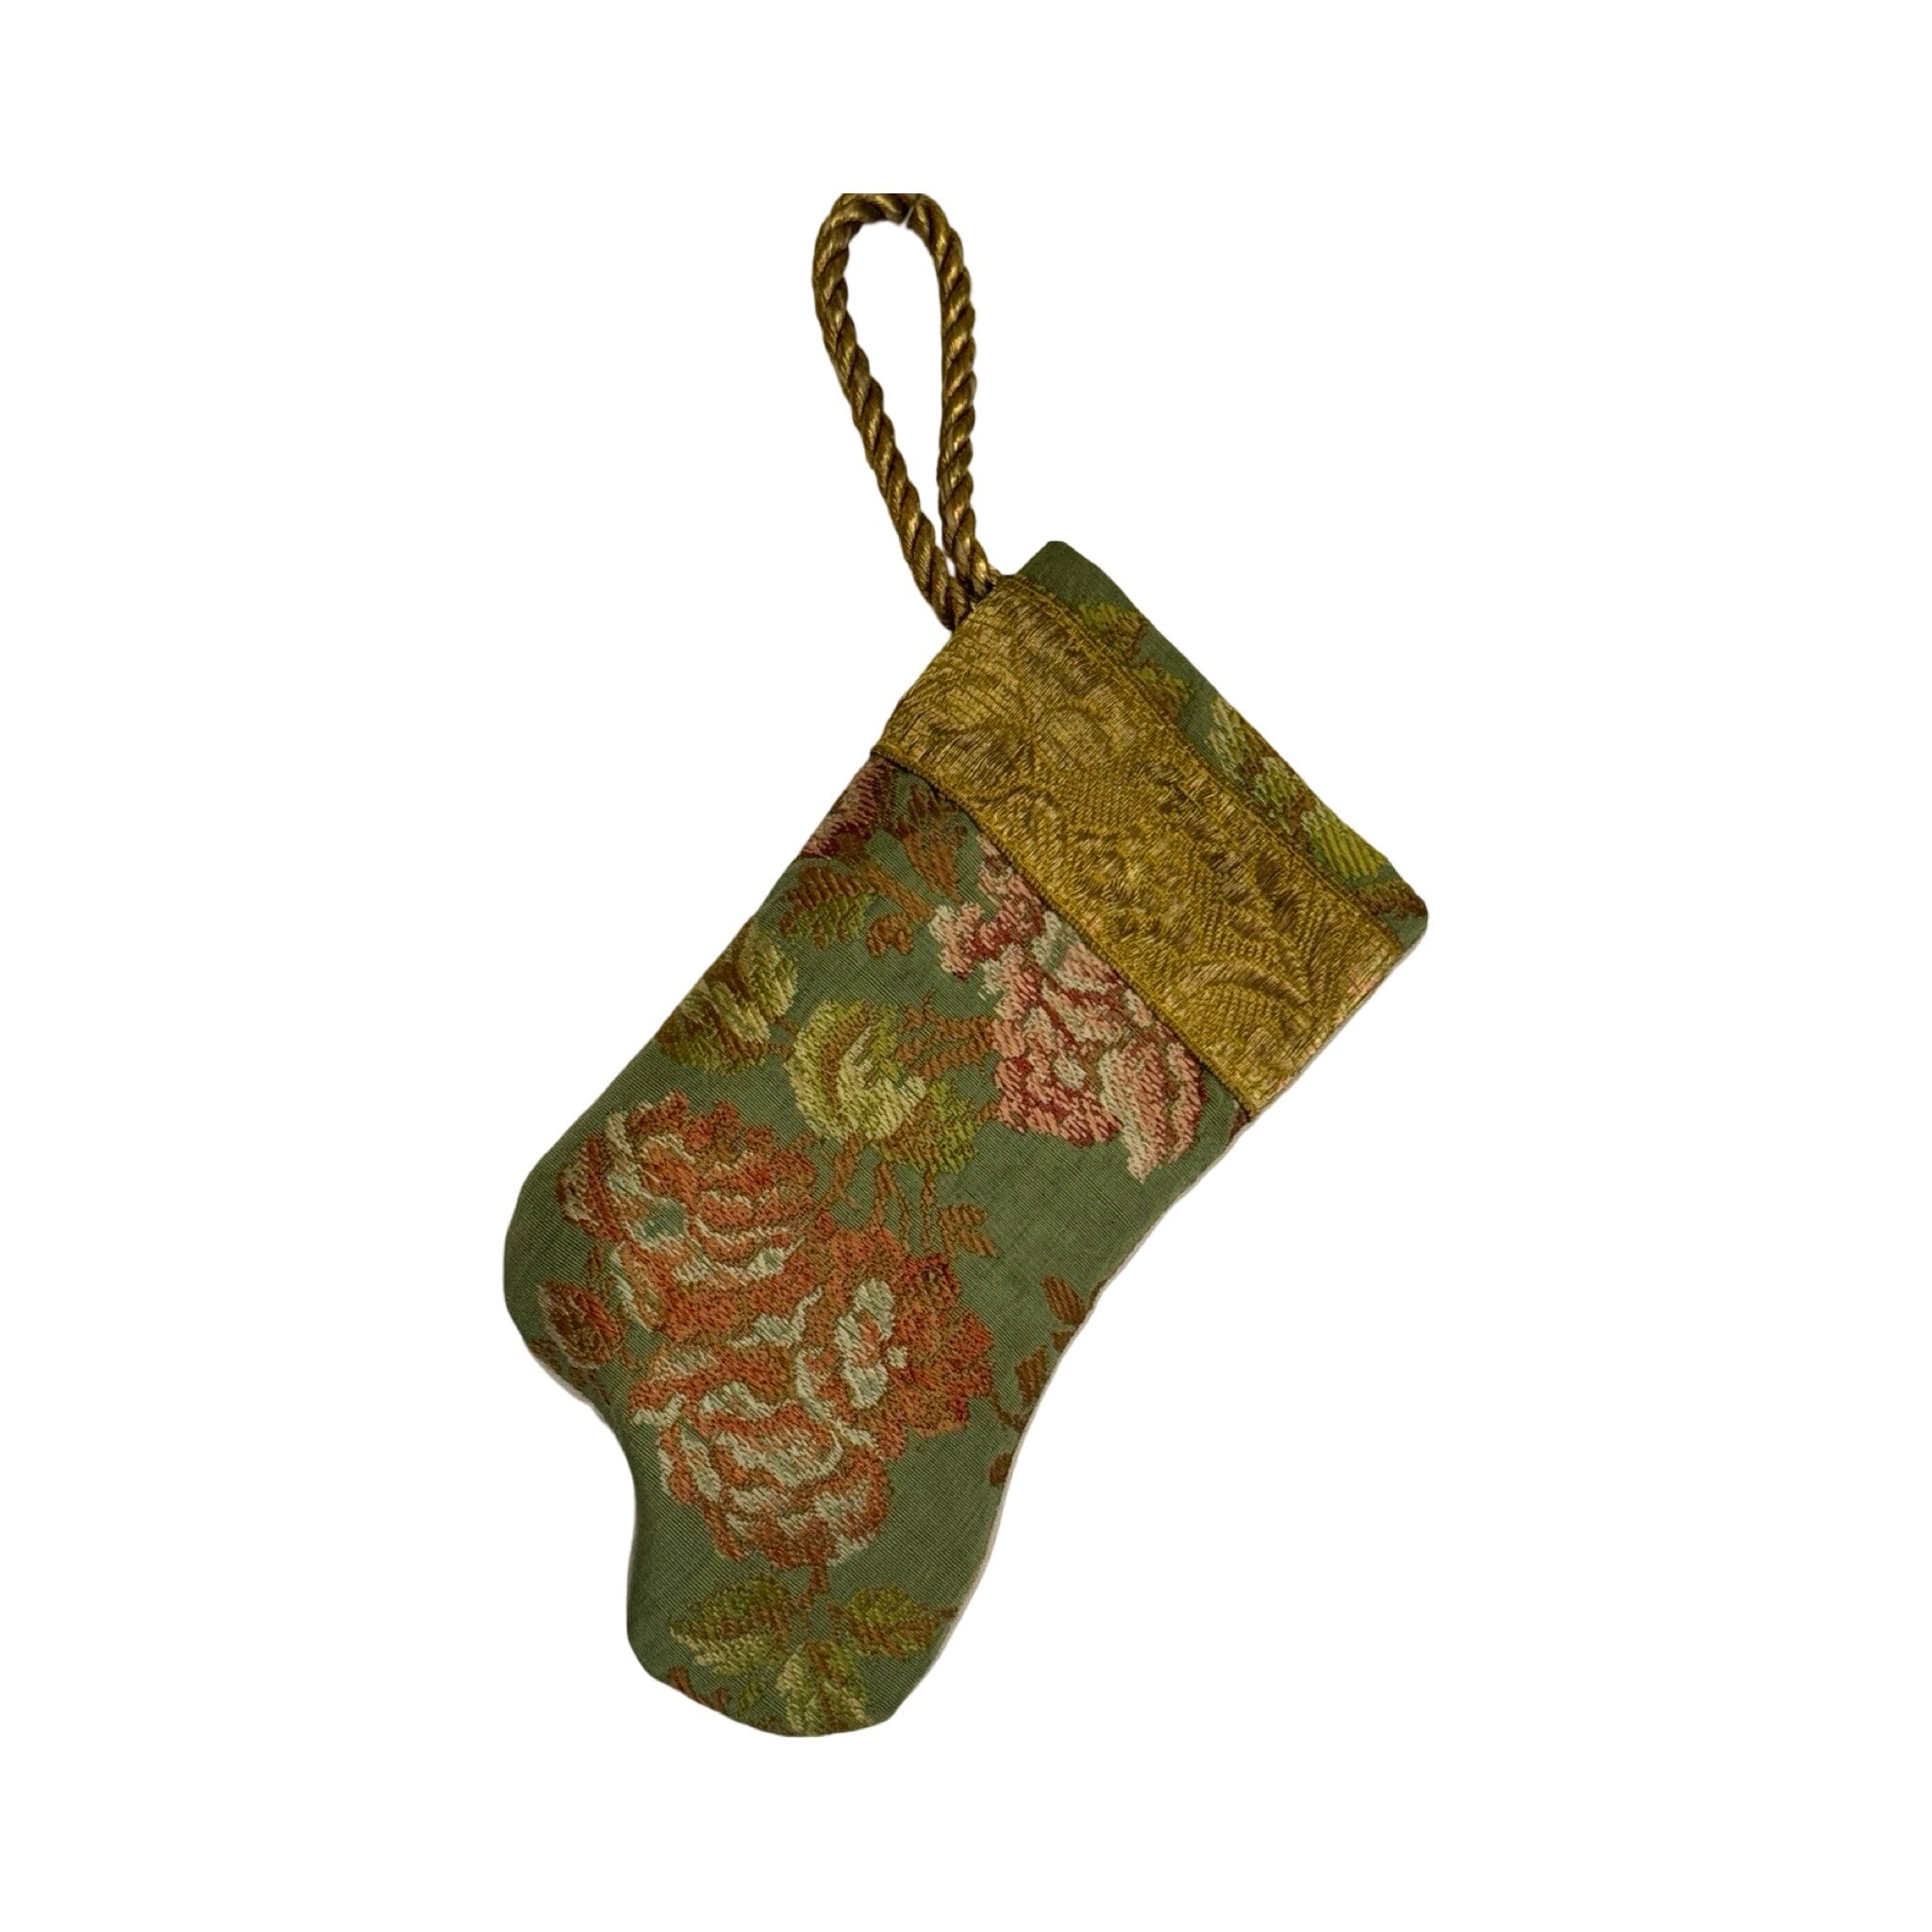 Handmade Mini Stocking Made From Vintage Fabric and Trims- Green Floral Ornament B. Viz Design F 